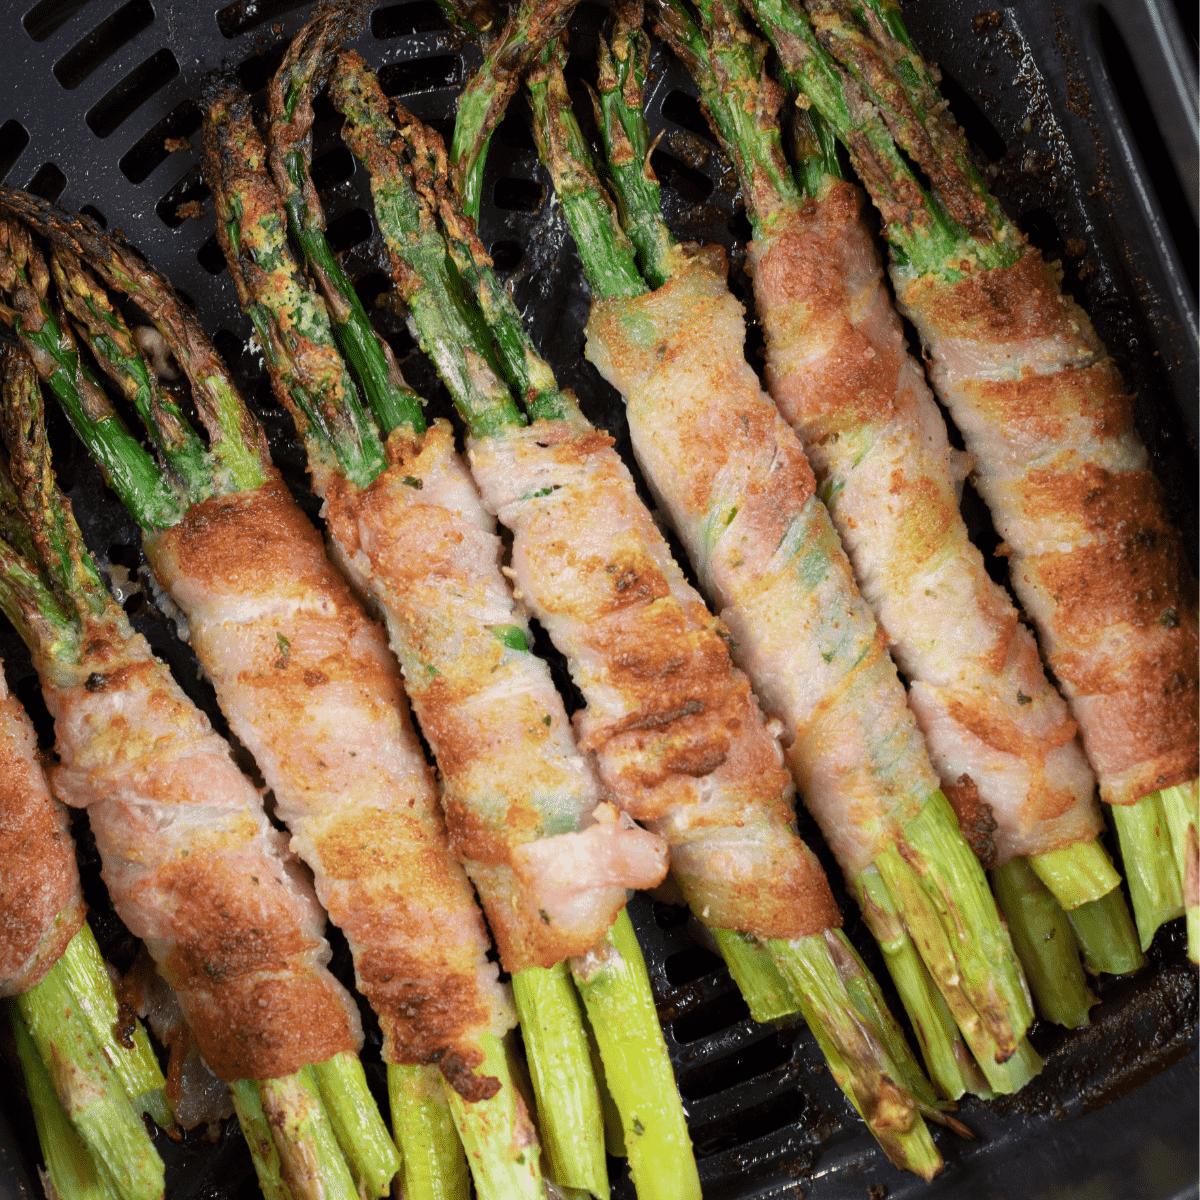 bacon wrapped asparagus in the air fryer basket